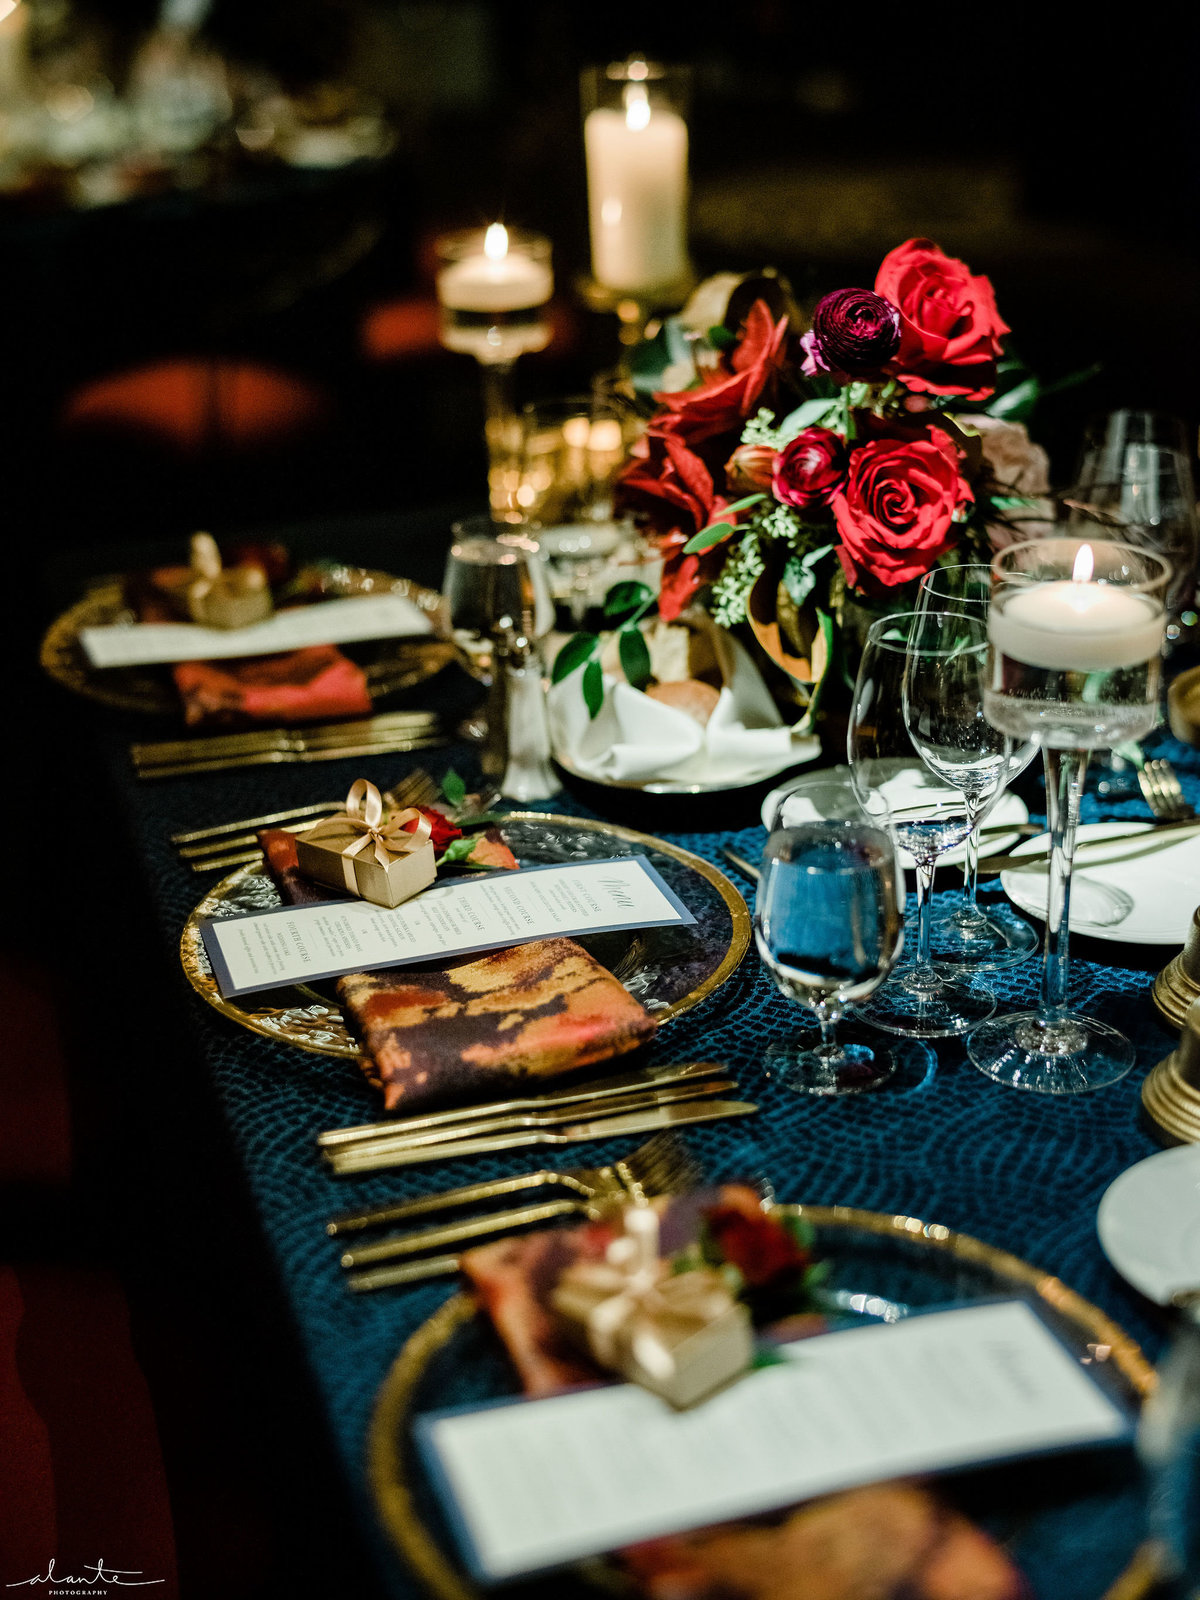 table scape at wedding reception with red roses, gold candle holders, and red and gold napkins on blue linen